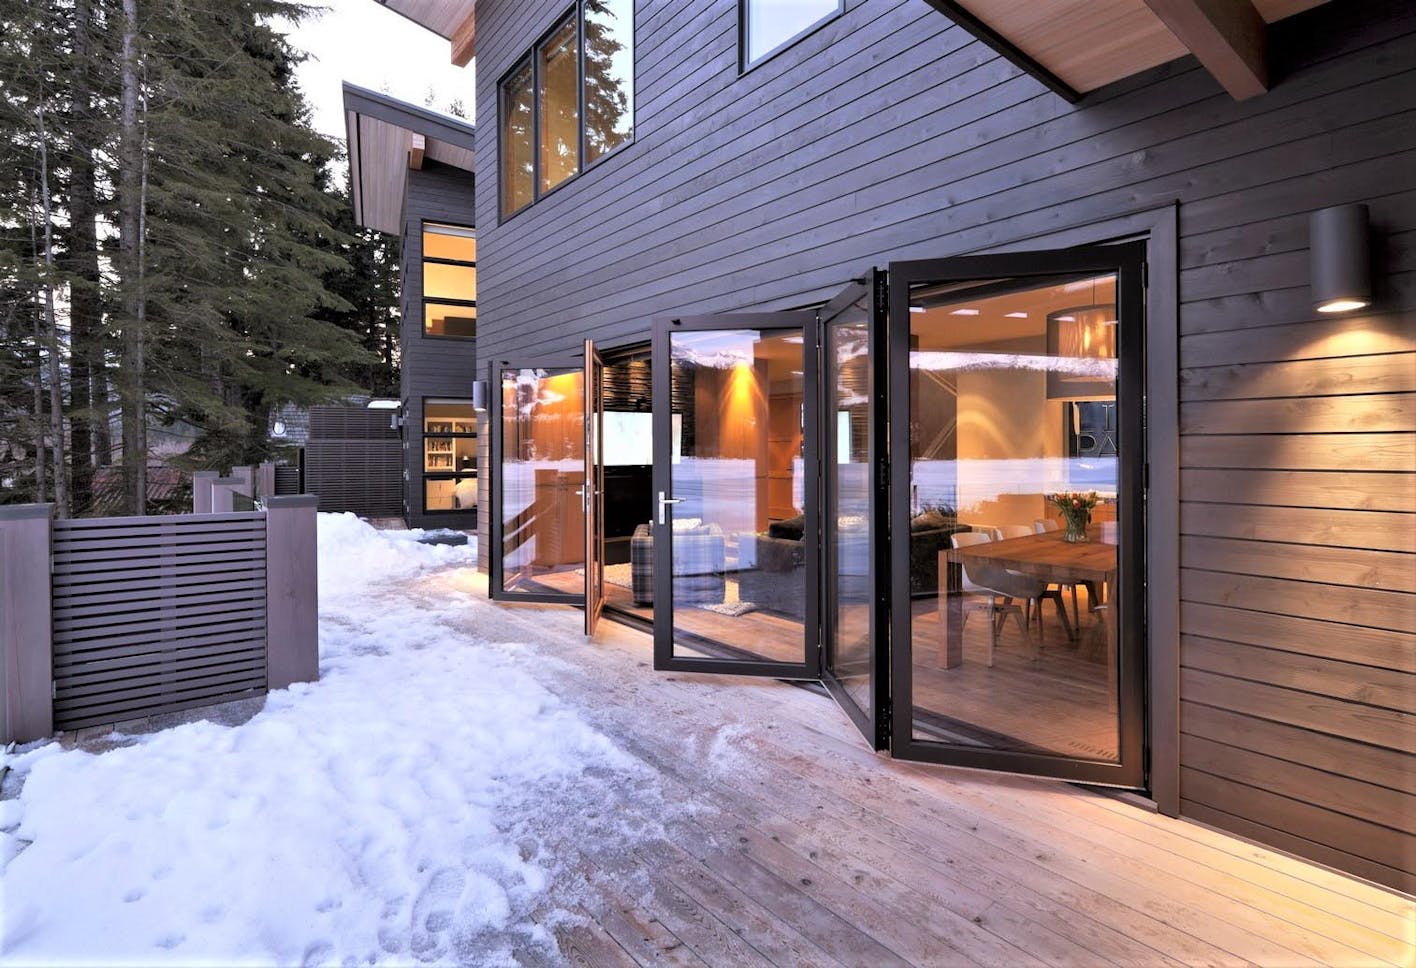 Folding glass walls replace a patio door and perform in harsh weather